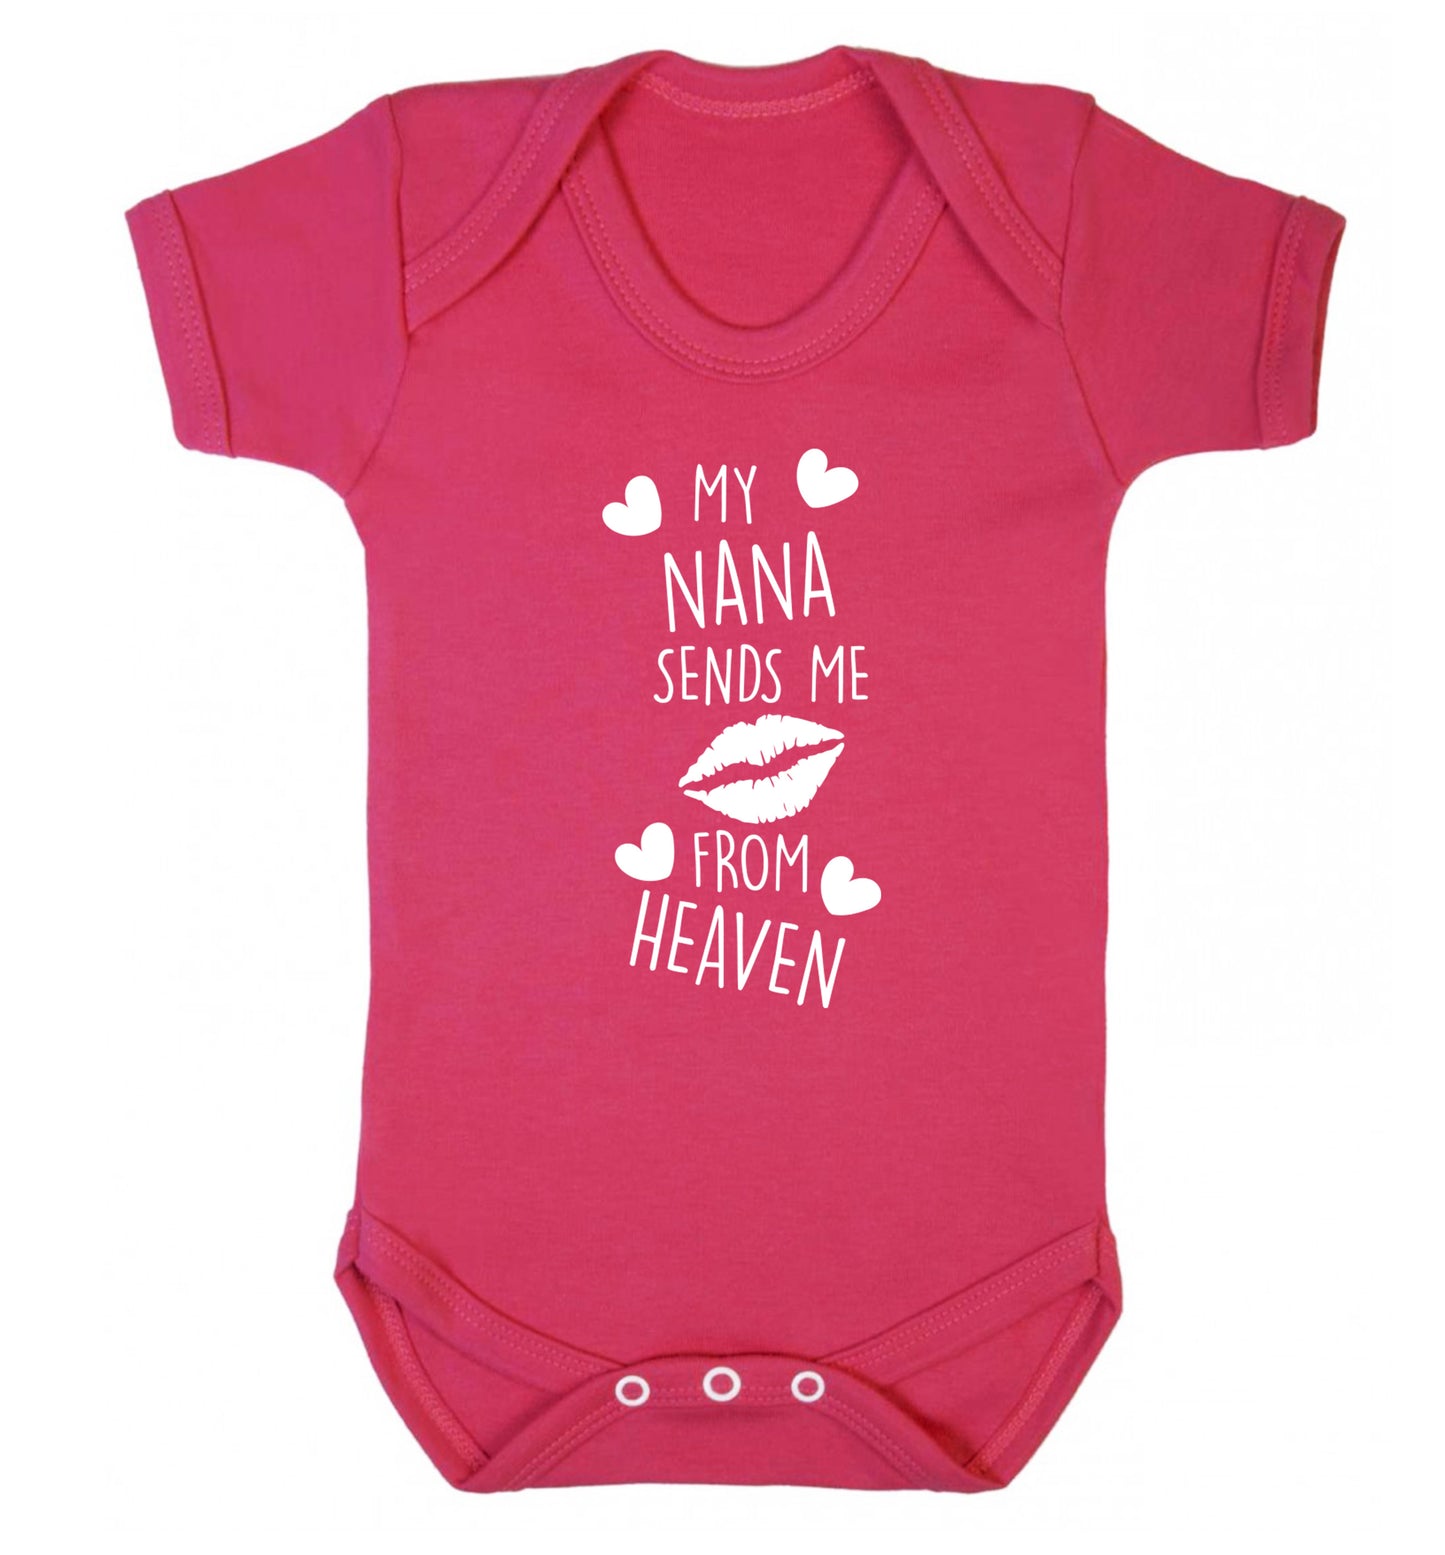 My nana sends me kisses from heaven Baby Vest dark pink 18-24 months